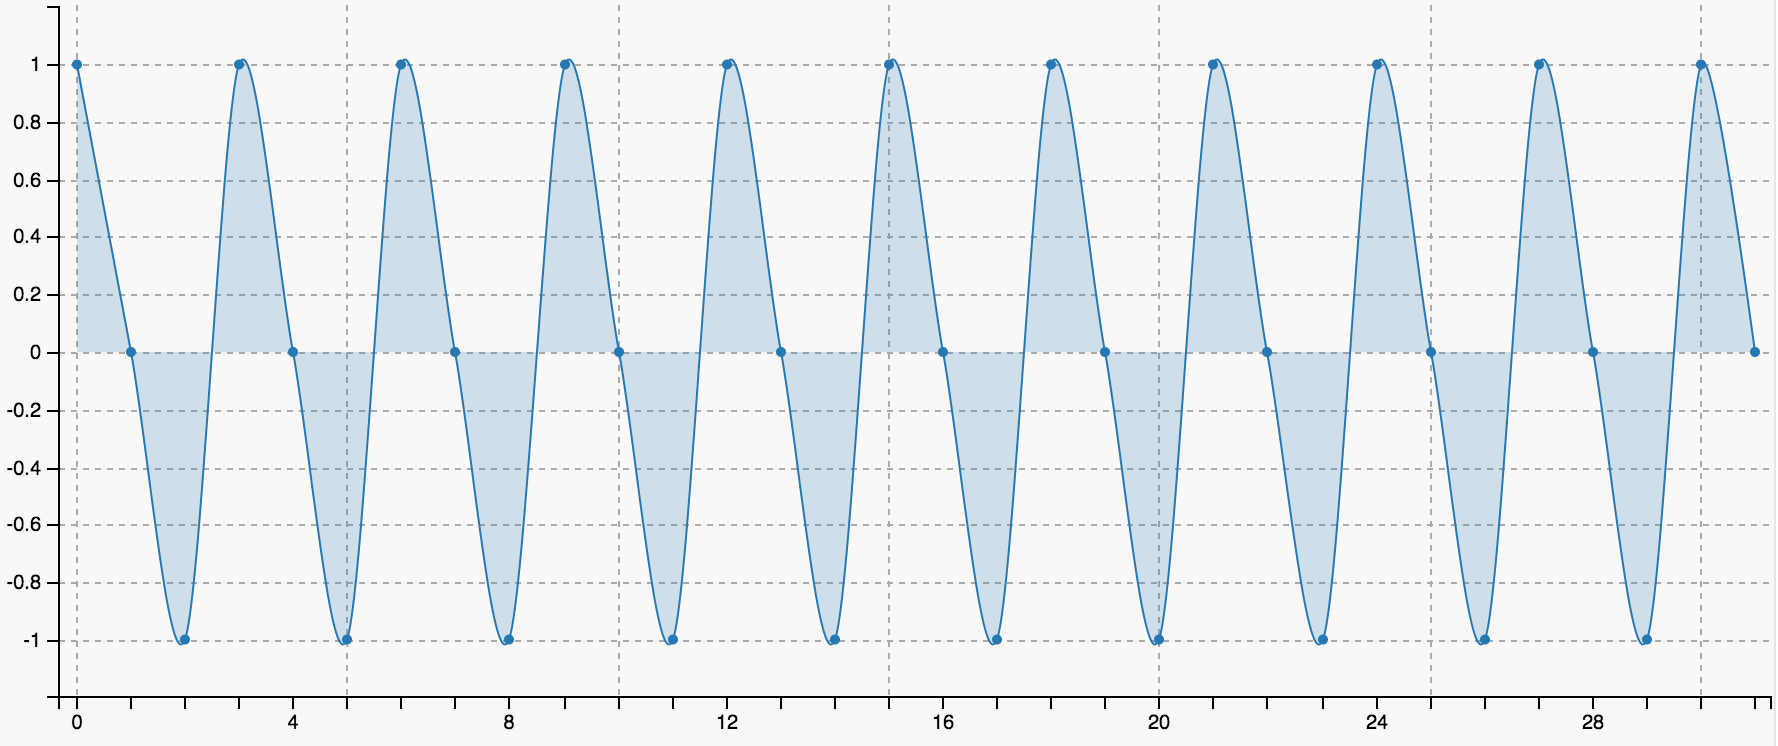 A graph of a signal over time that oscillates from 1, to 0, to -1, and repeats
until there are 32 values in the signal